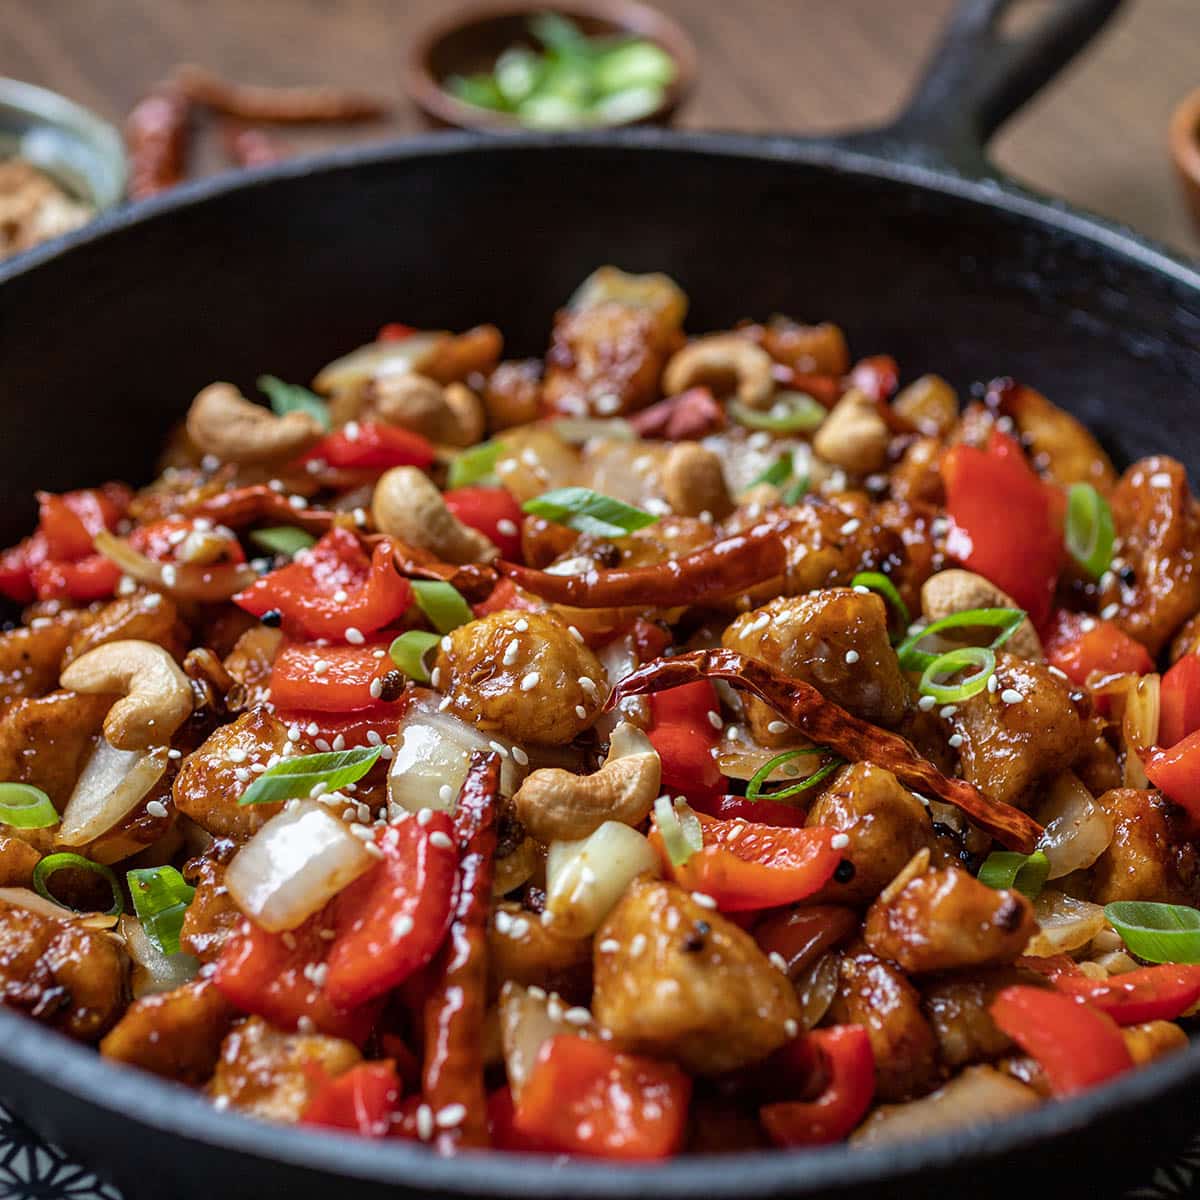 Cast iron pan with szechuan chicken with peppers and chilis.